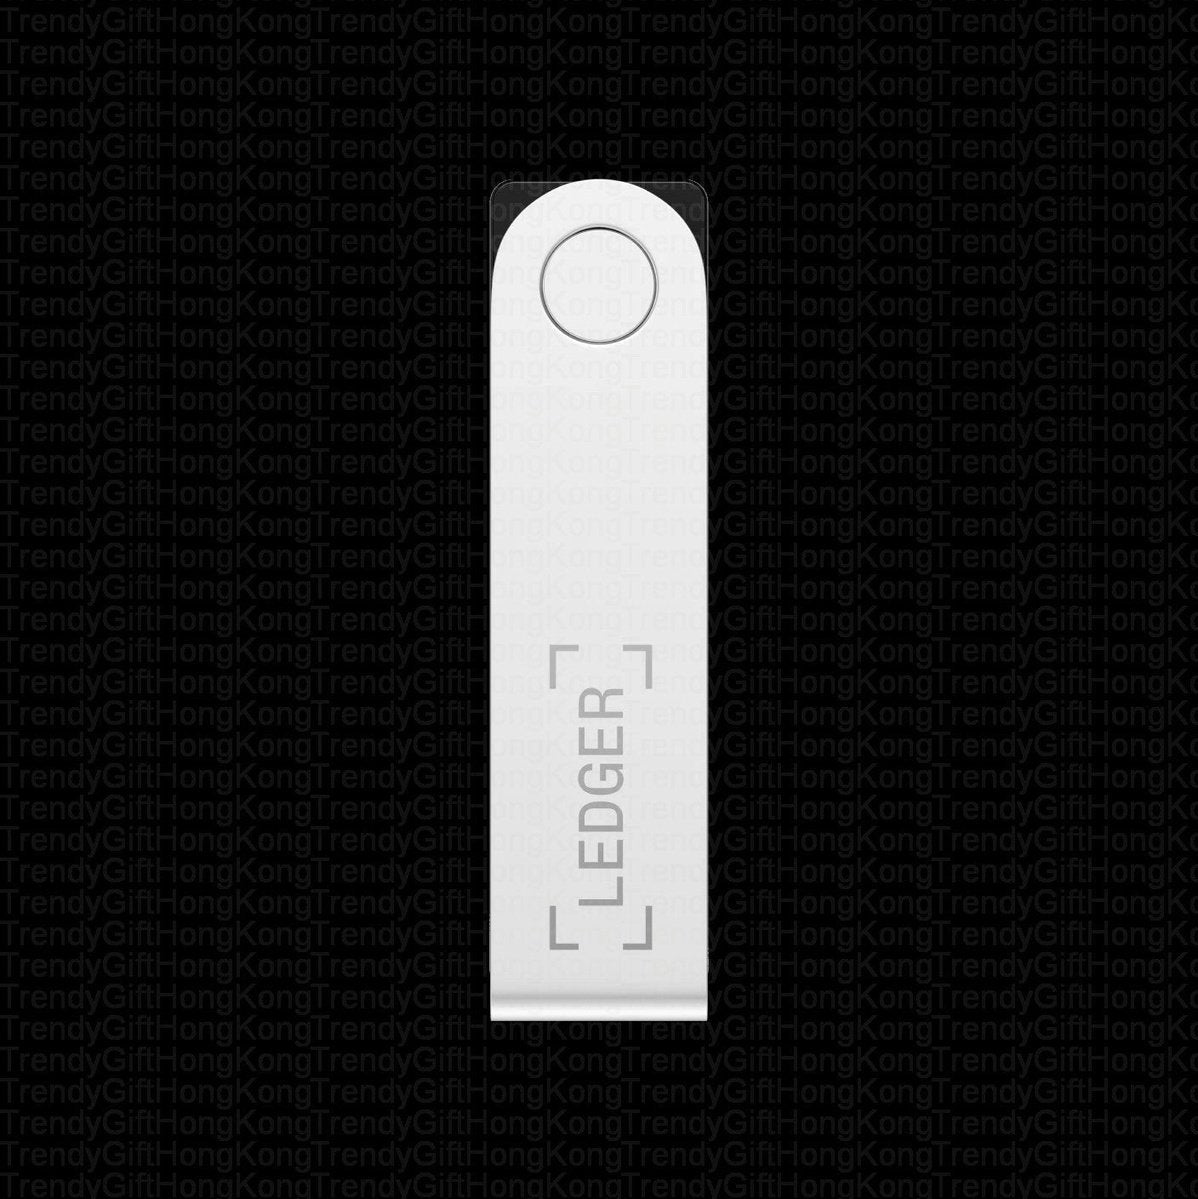 Ledger Nano X Wireless Bitcoin Wallet: Secure Your Crypto, Empower Your Control trendygifthk